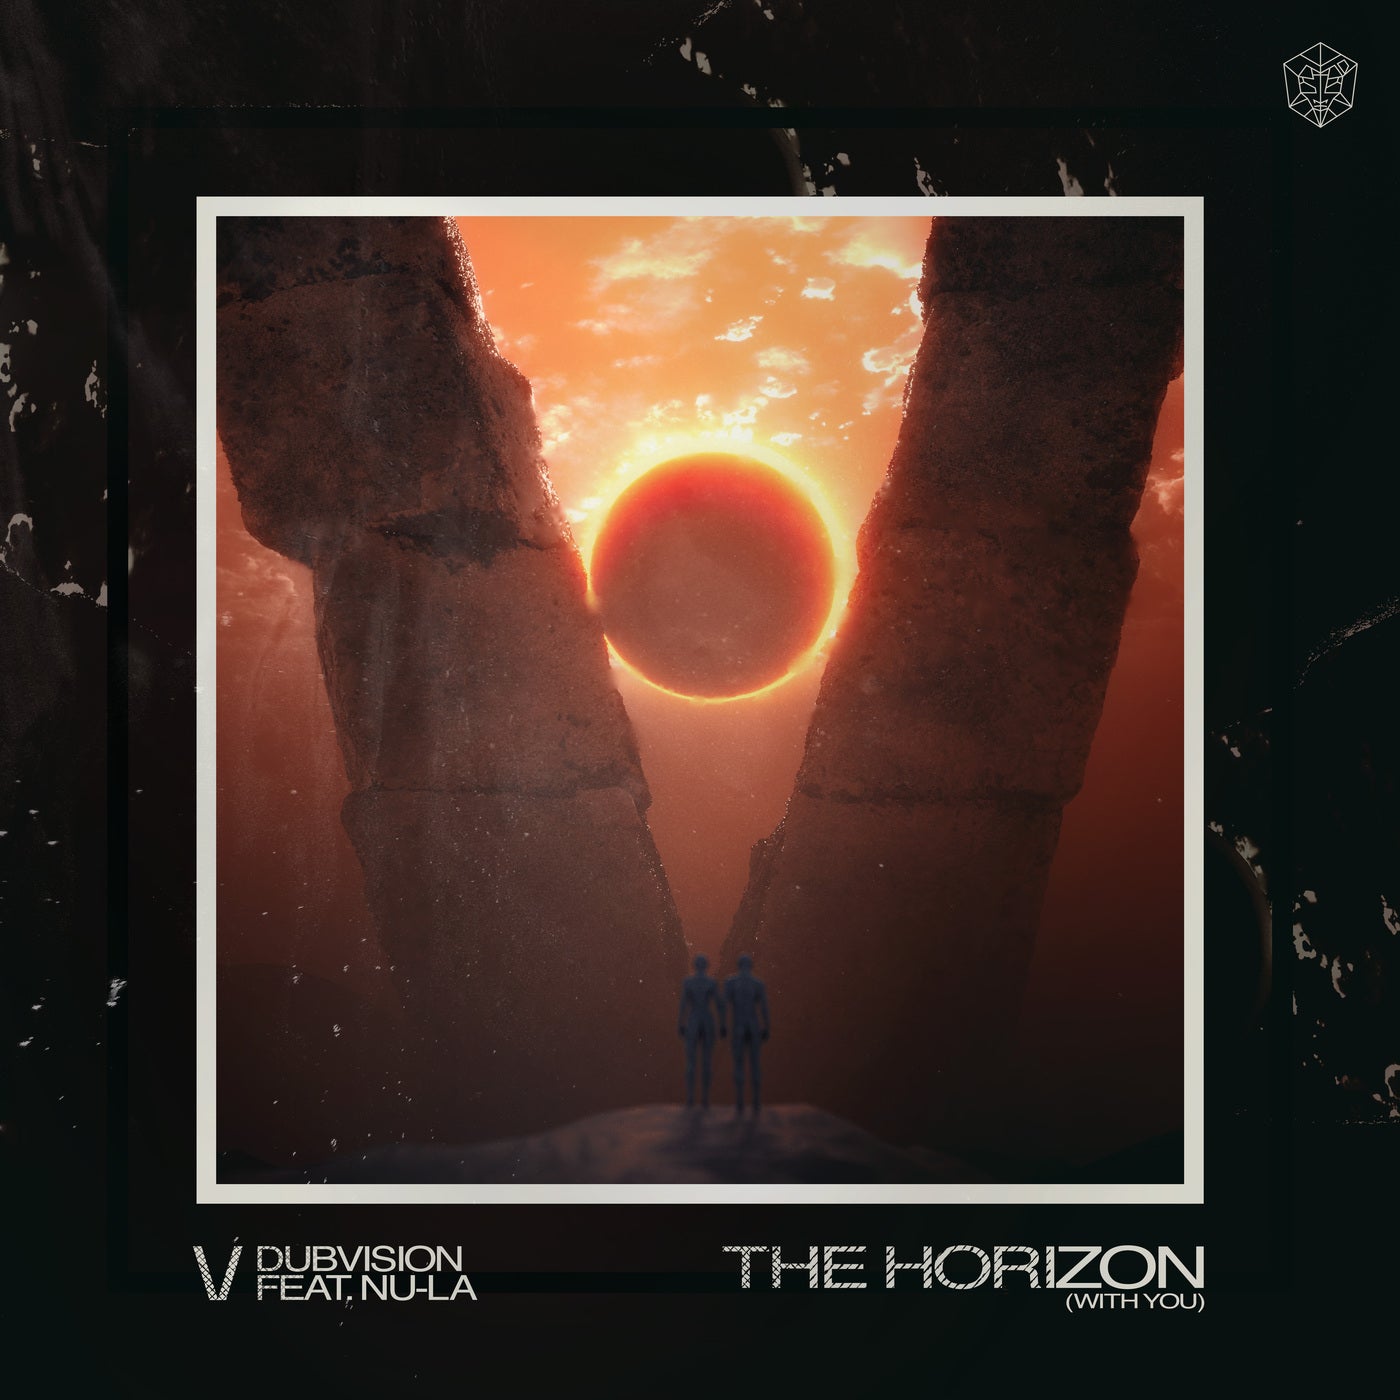 DubVision featuring Nu-La — The Horizon (With You) cover artwork